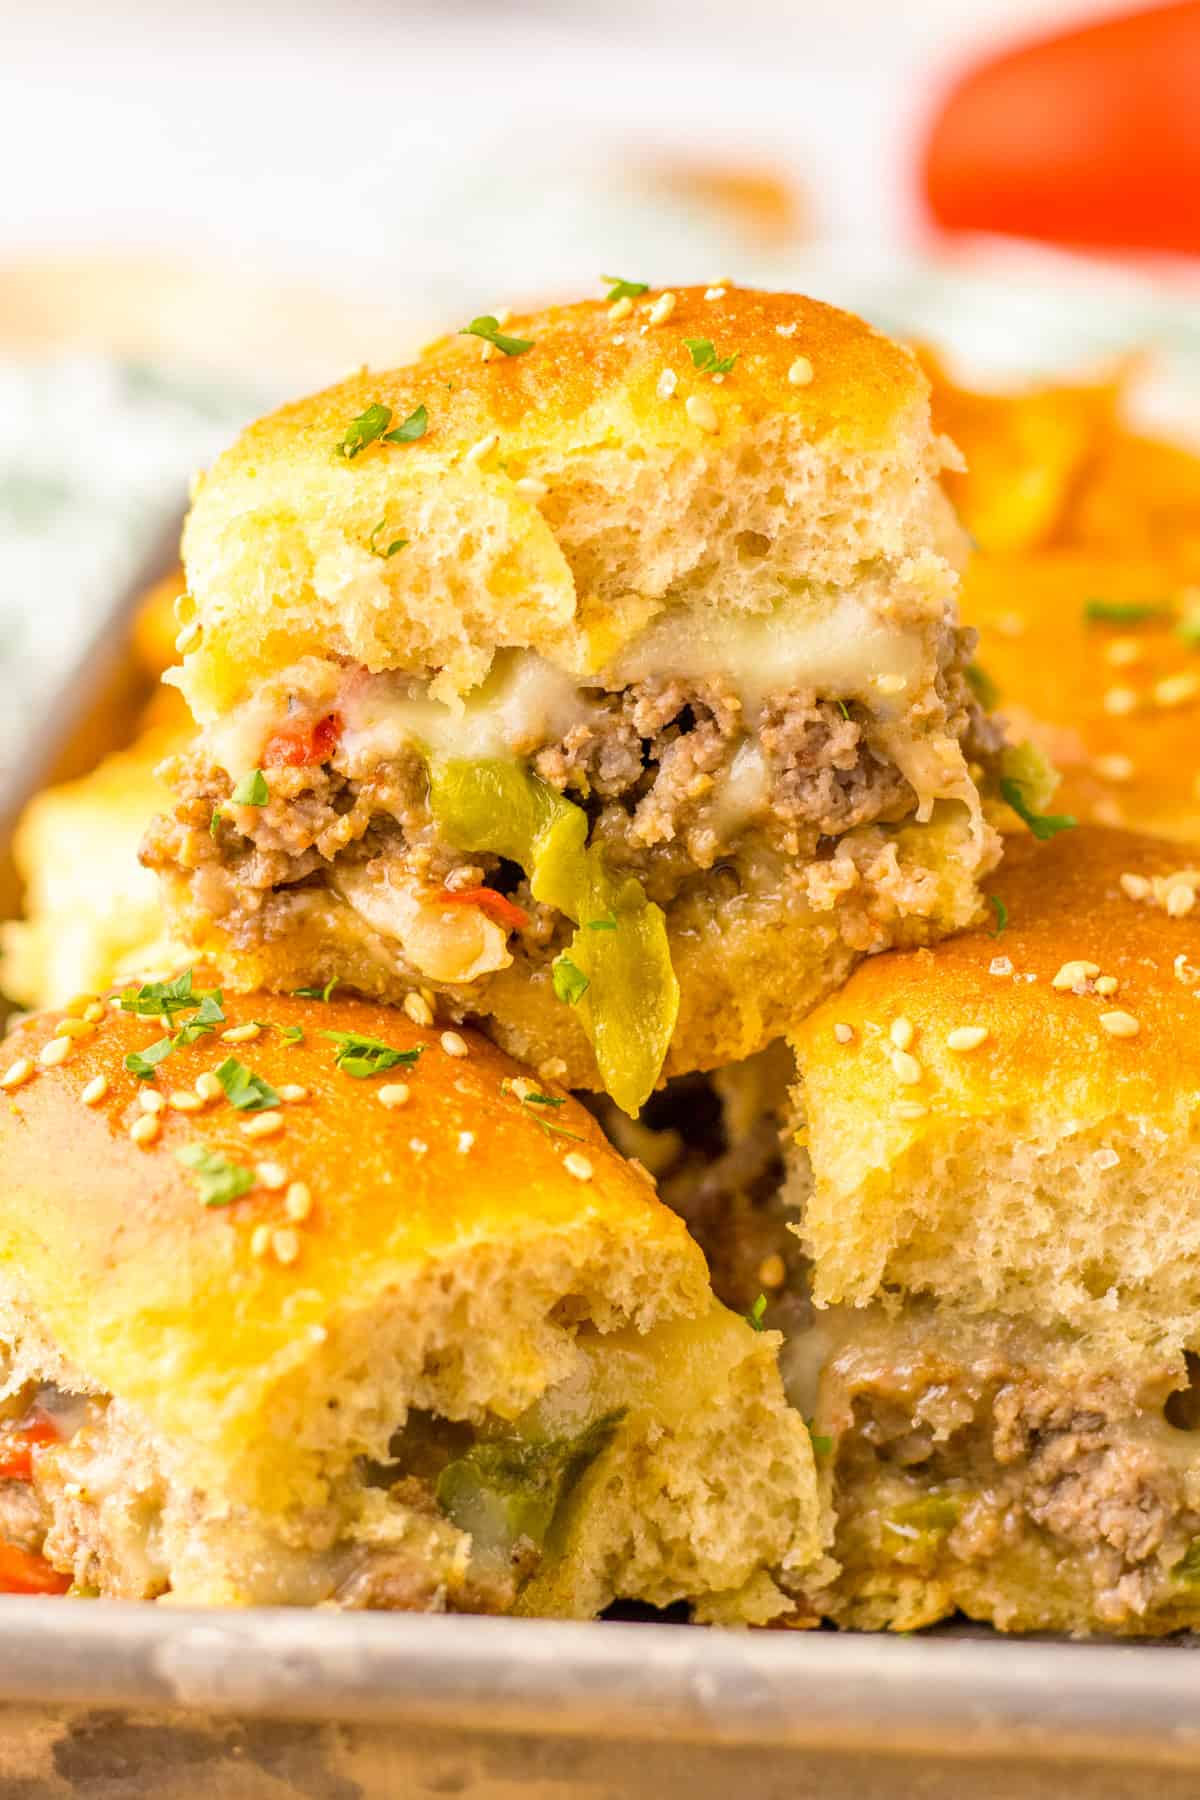 Philly Cheesesteak Sliders with Ground Beef, peppers, onions, and provolone cheese on Hawaiian Rolls.